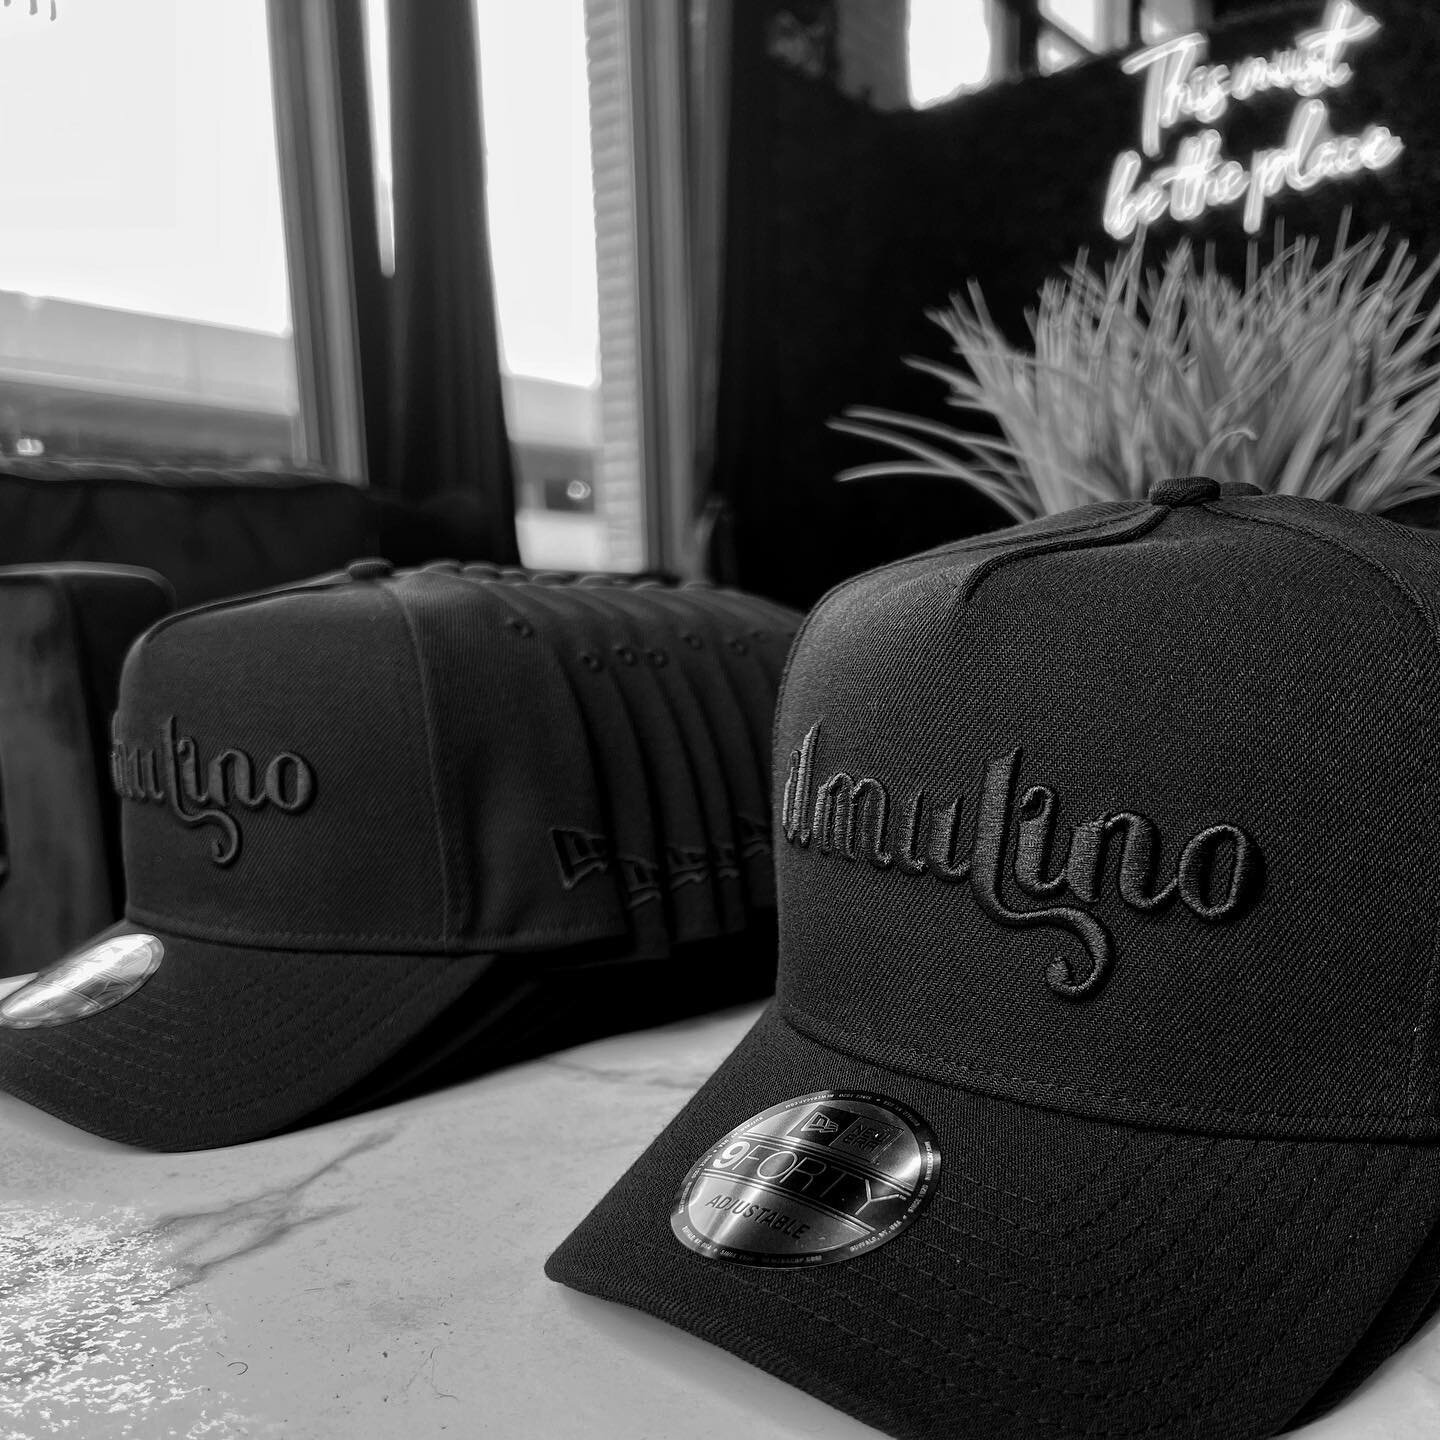 We teamed up with our friends over at @neweracap to come up with these beautiful pieces. It is with great pleasure to work with a fellow Buffalo company that shares the same values &amp; visions. 

#ILMULINO